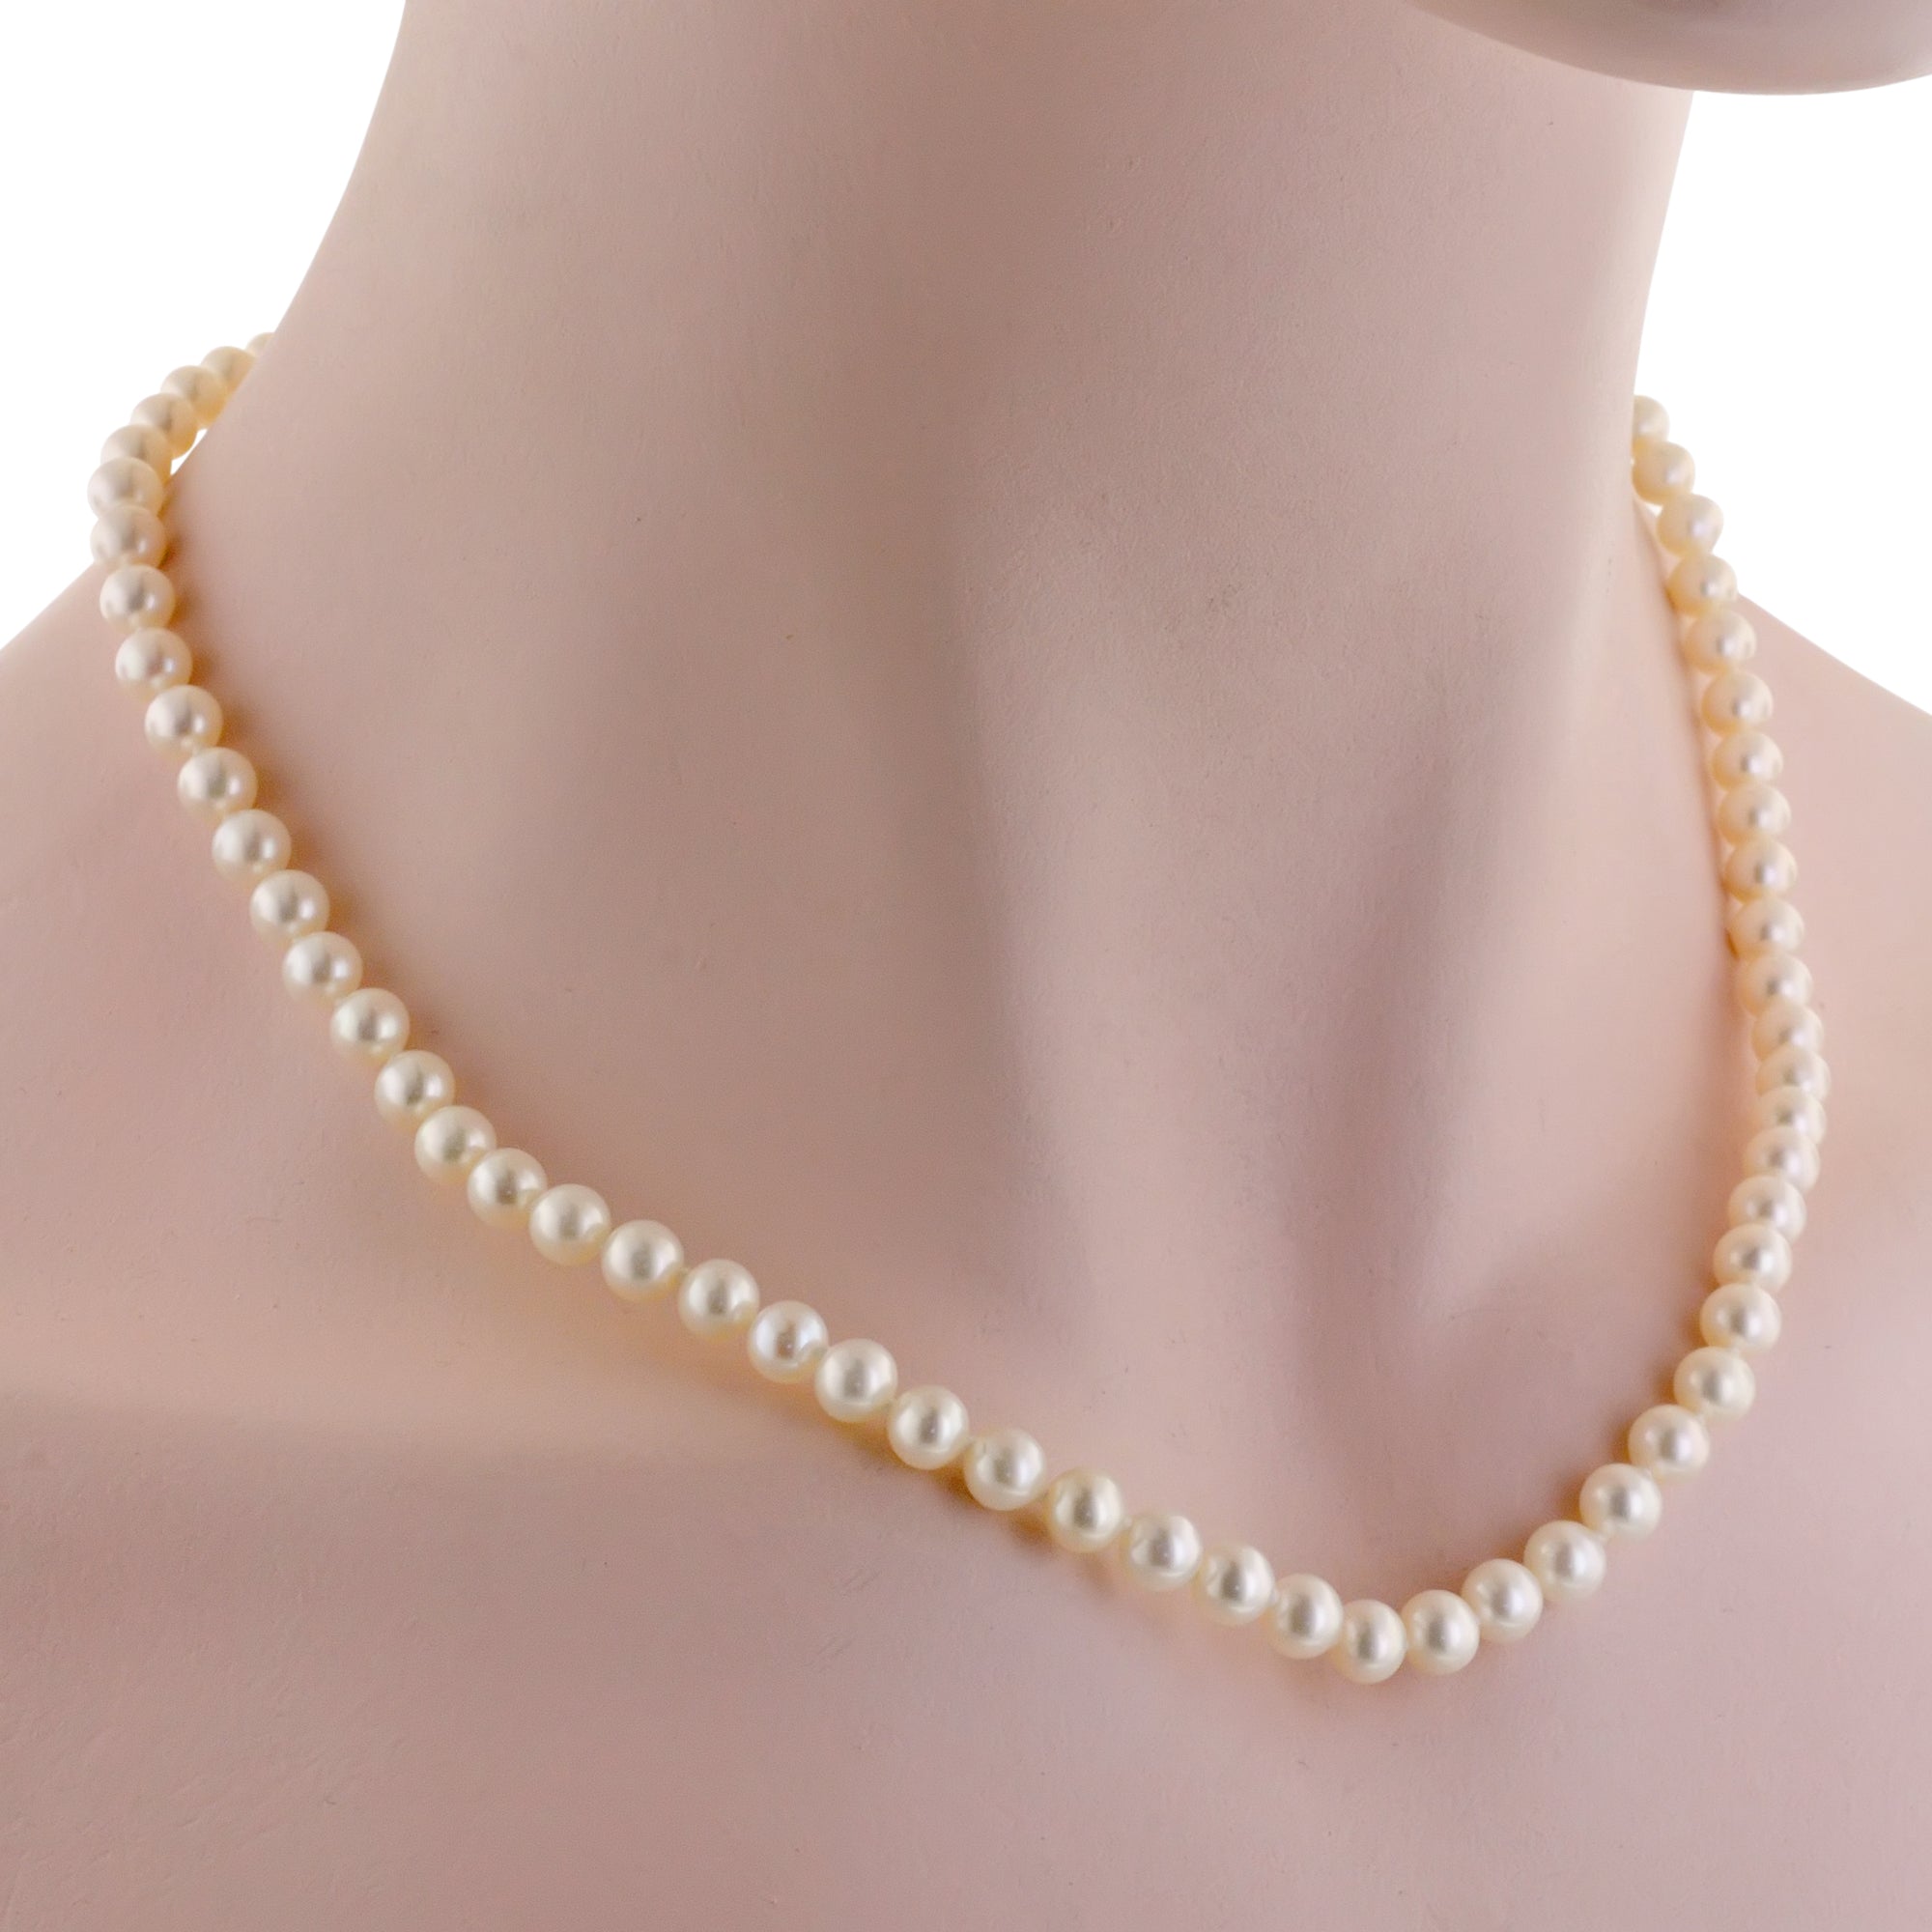 Akoya Cultured Pearl Necklace in 14kt White Gold (5.5-6mm pearls)